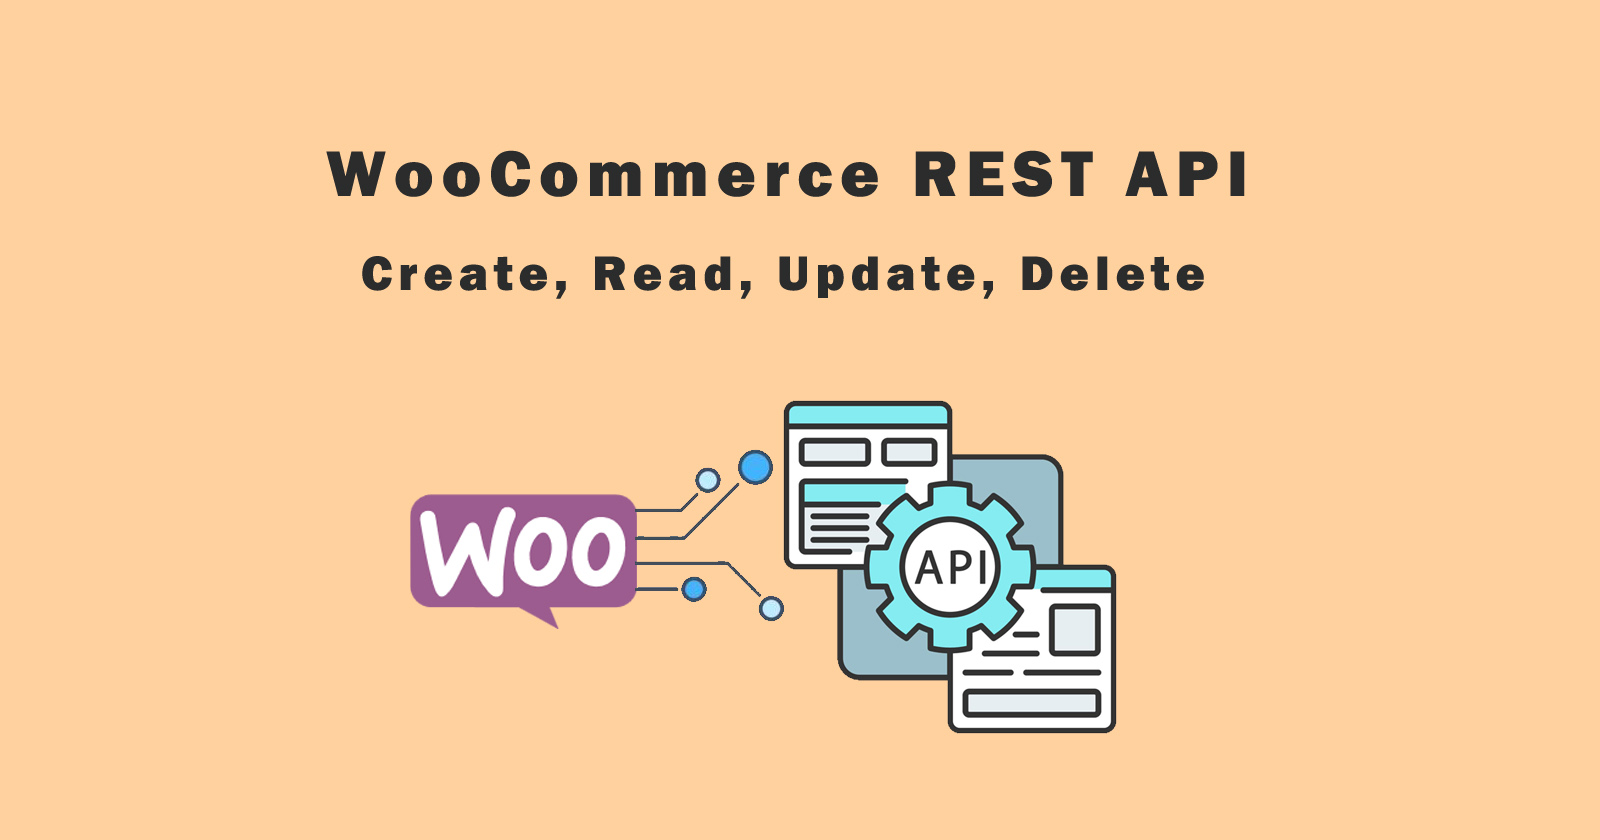 WooCommerce REST API - Create, Read, Update, Delete Products